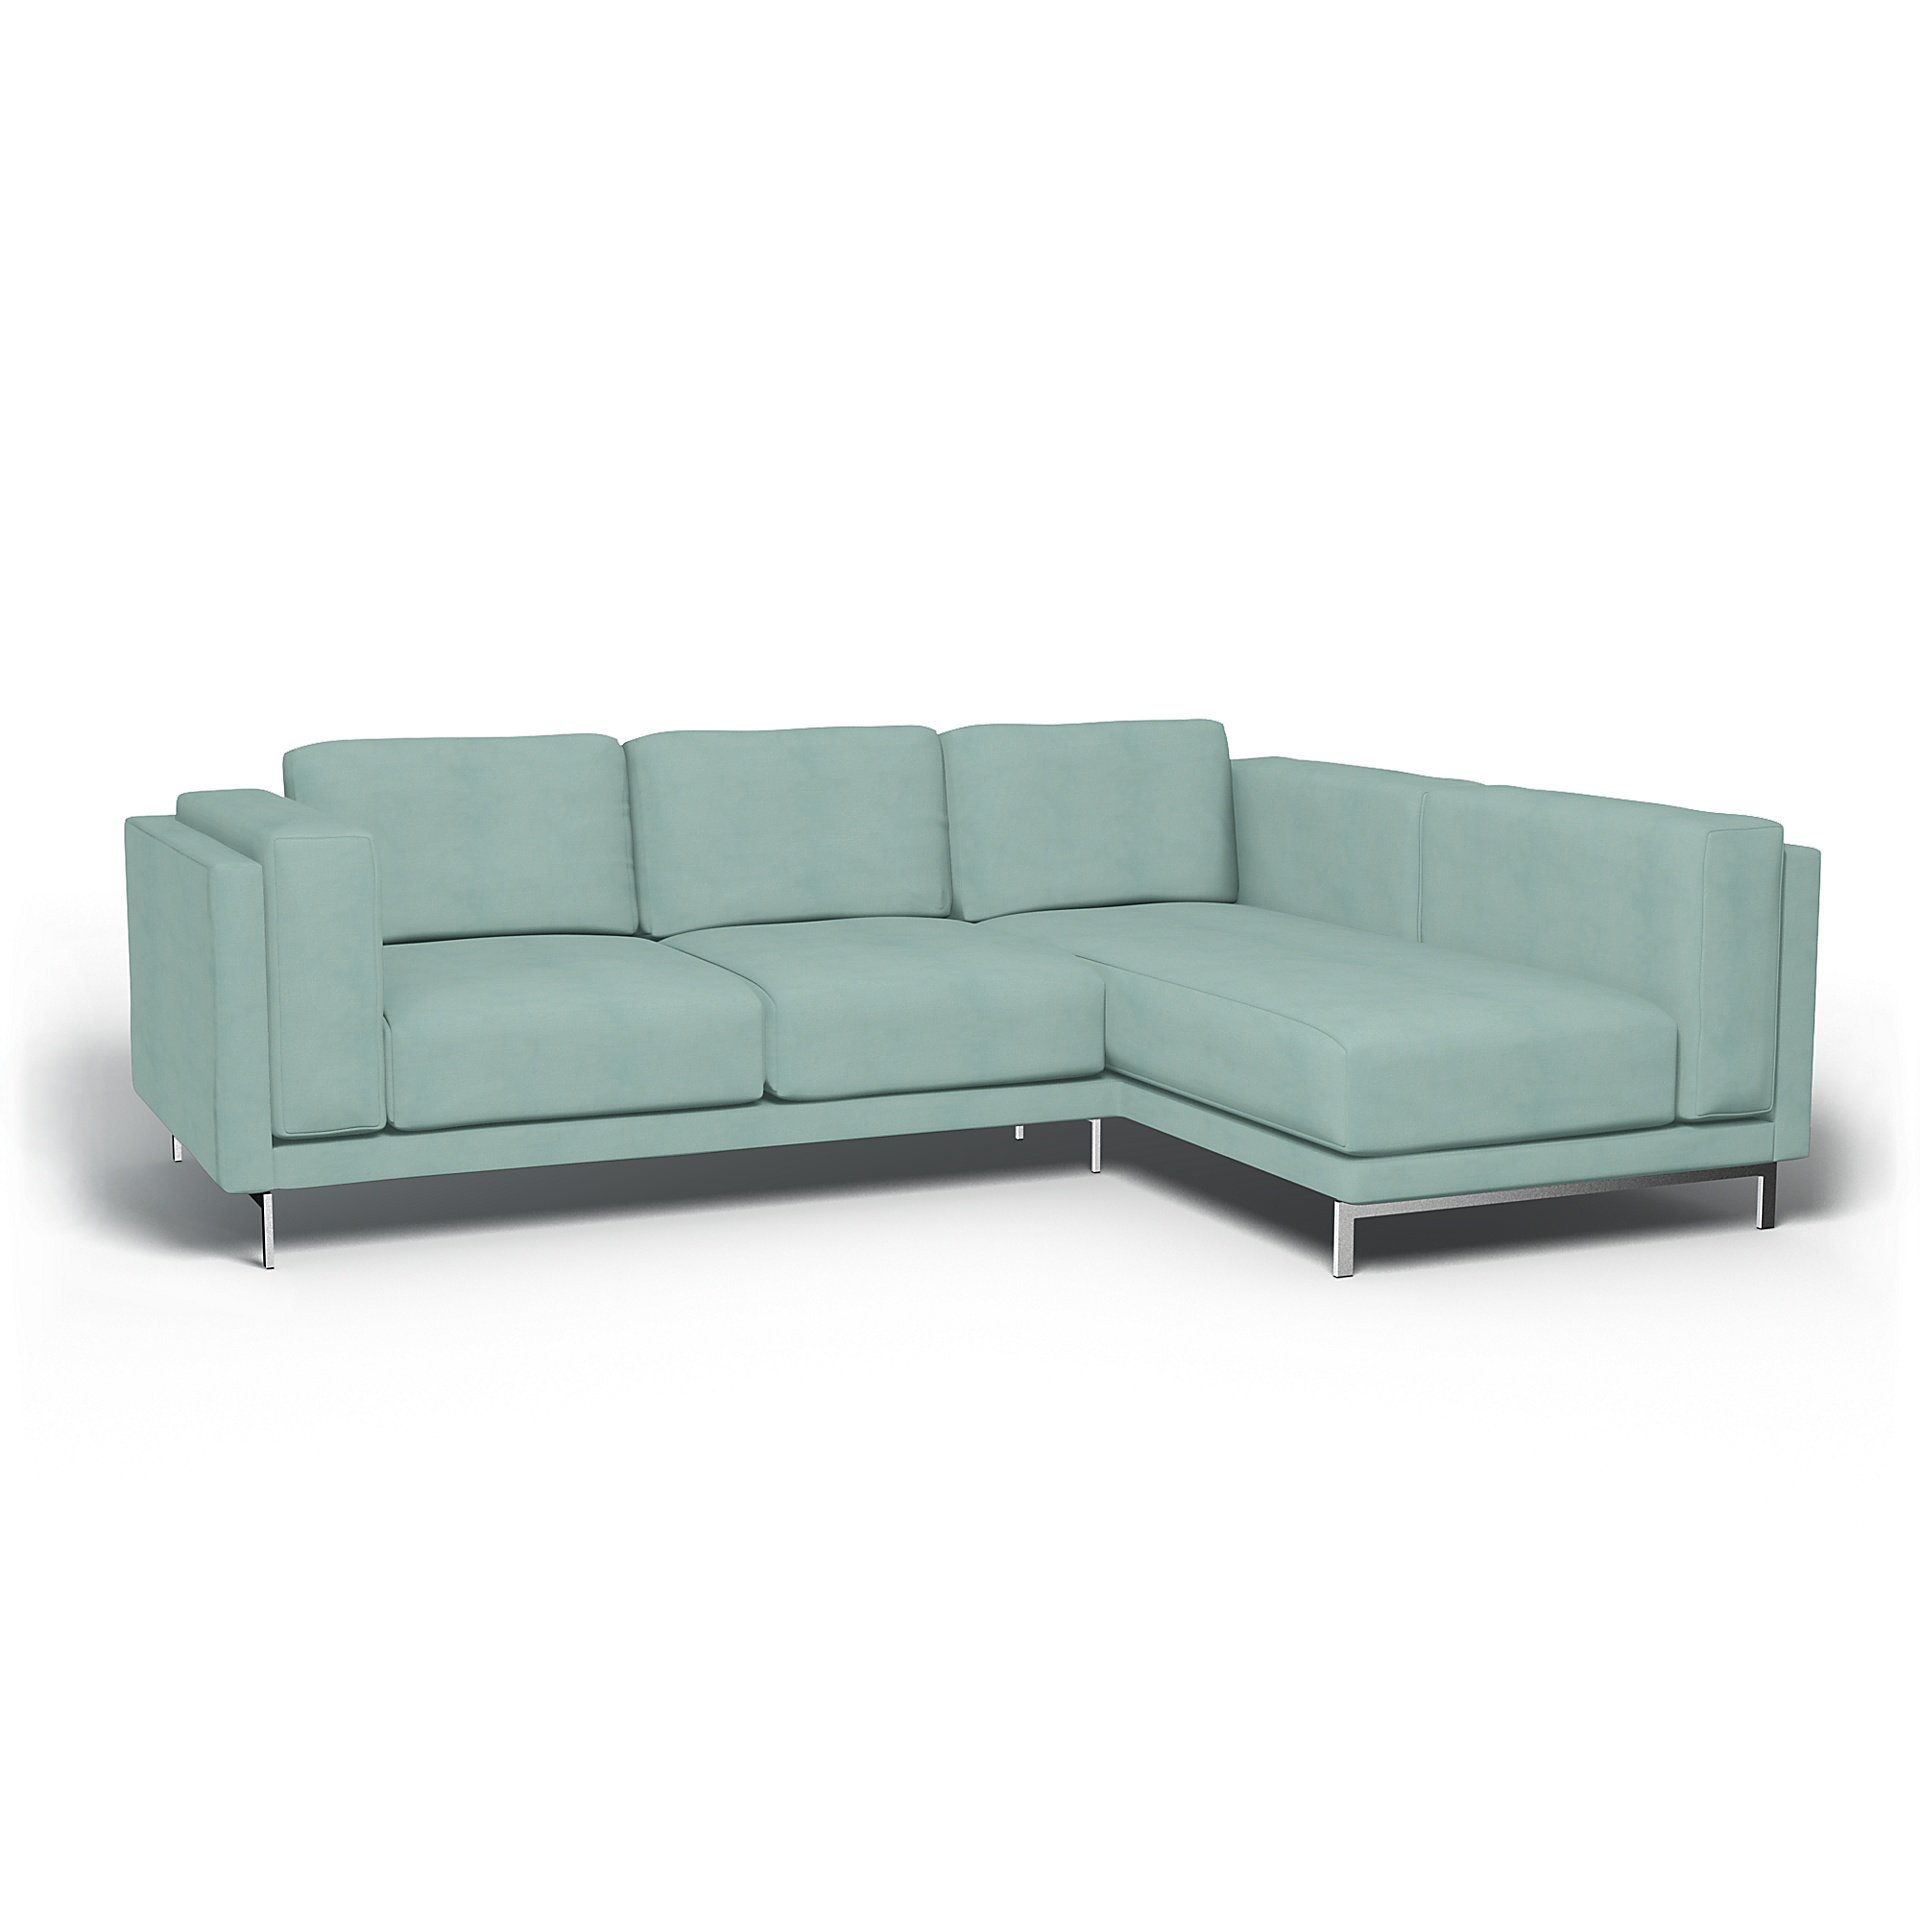 IKEA - Nockeby 3 Seat Sofa with Right Chaise Cover, Mineral Blue, Linen - Bemz